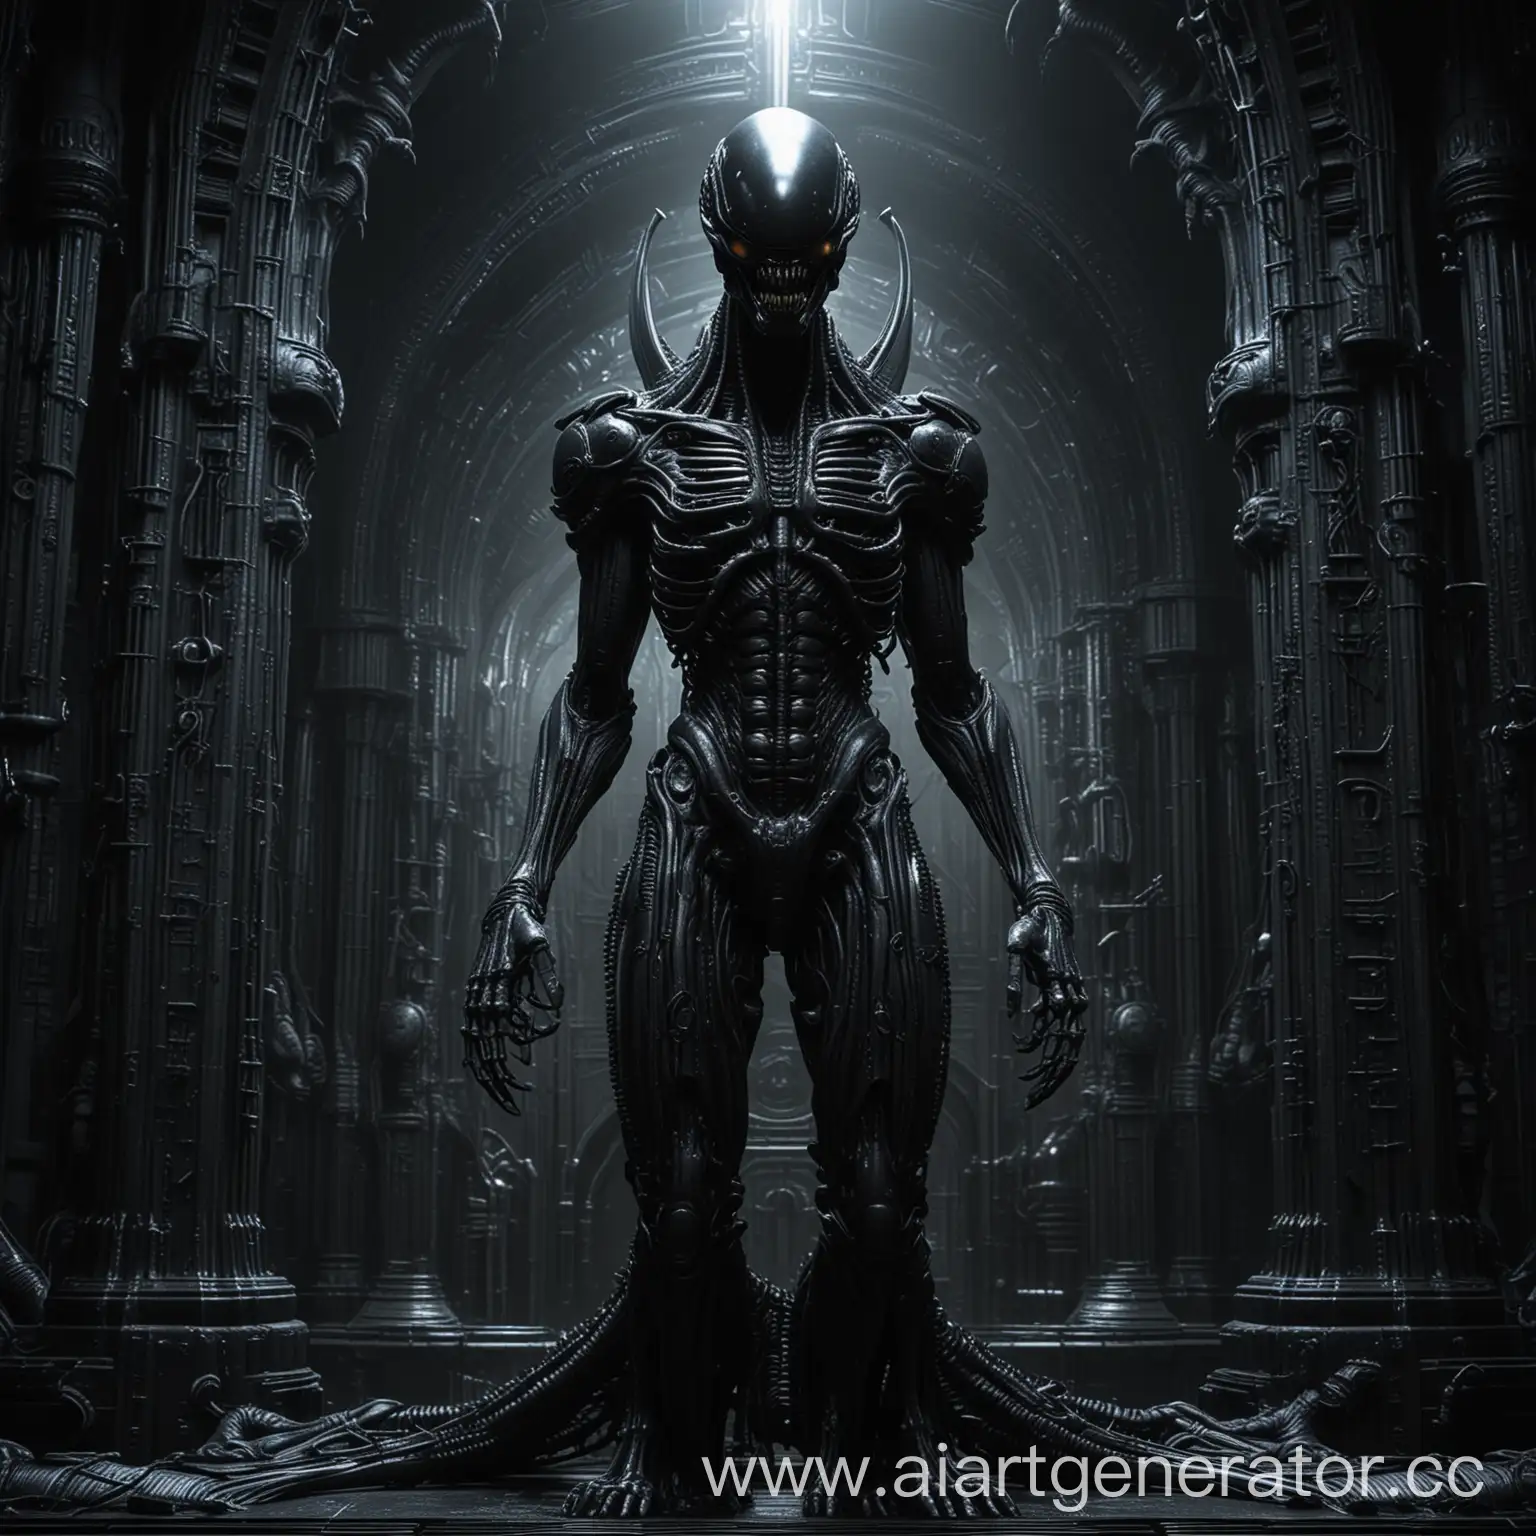 Biomechanical-Alien-Xenomorph-Statue-in-Infernal-Gothic-Cathedral